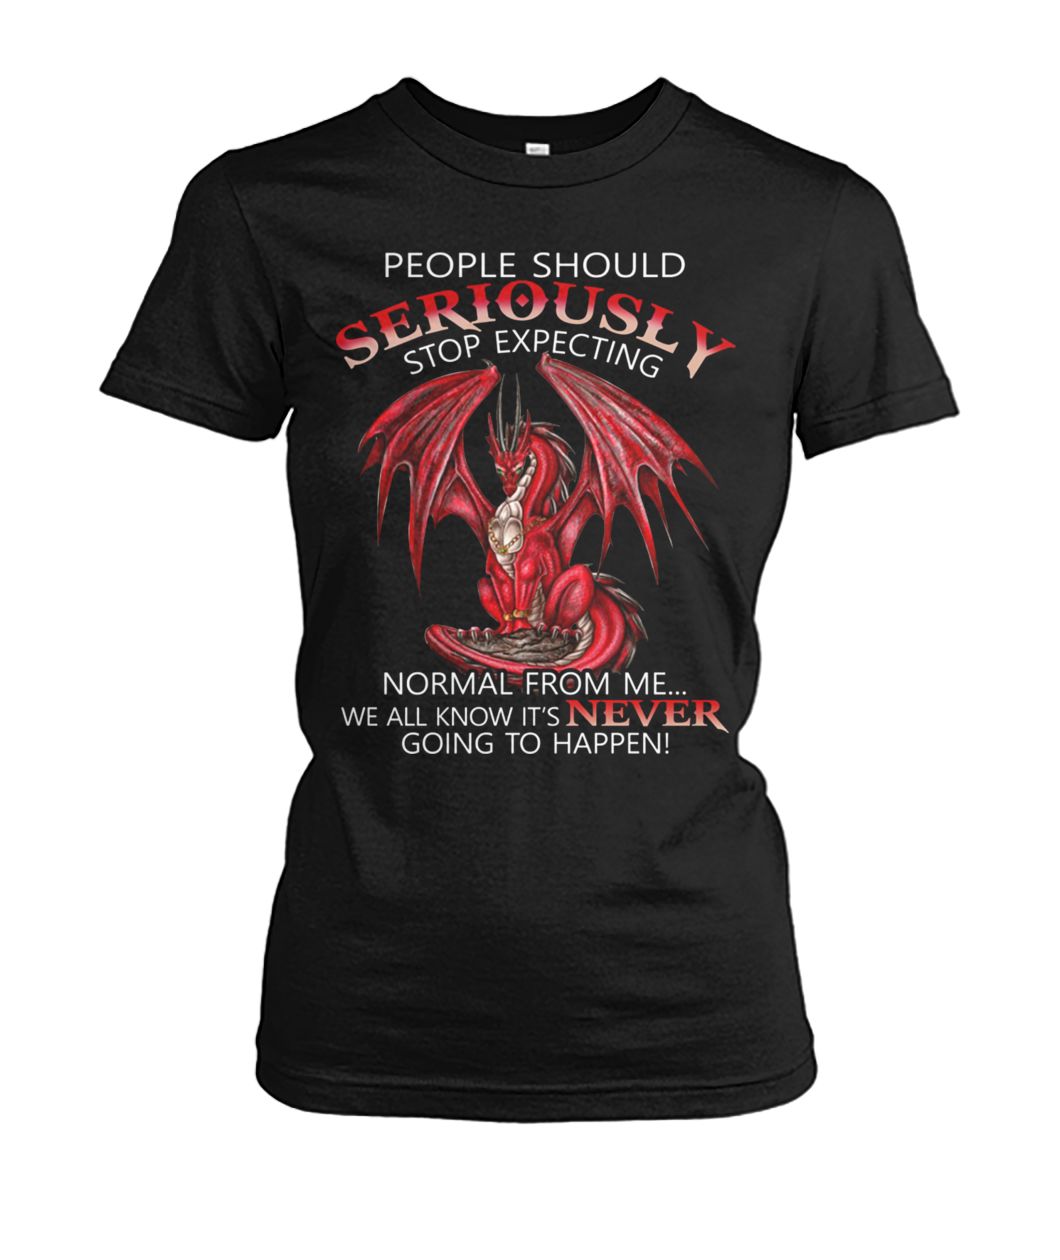 People should seriously stop expecting normal from me red dragon women's crew tee